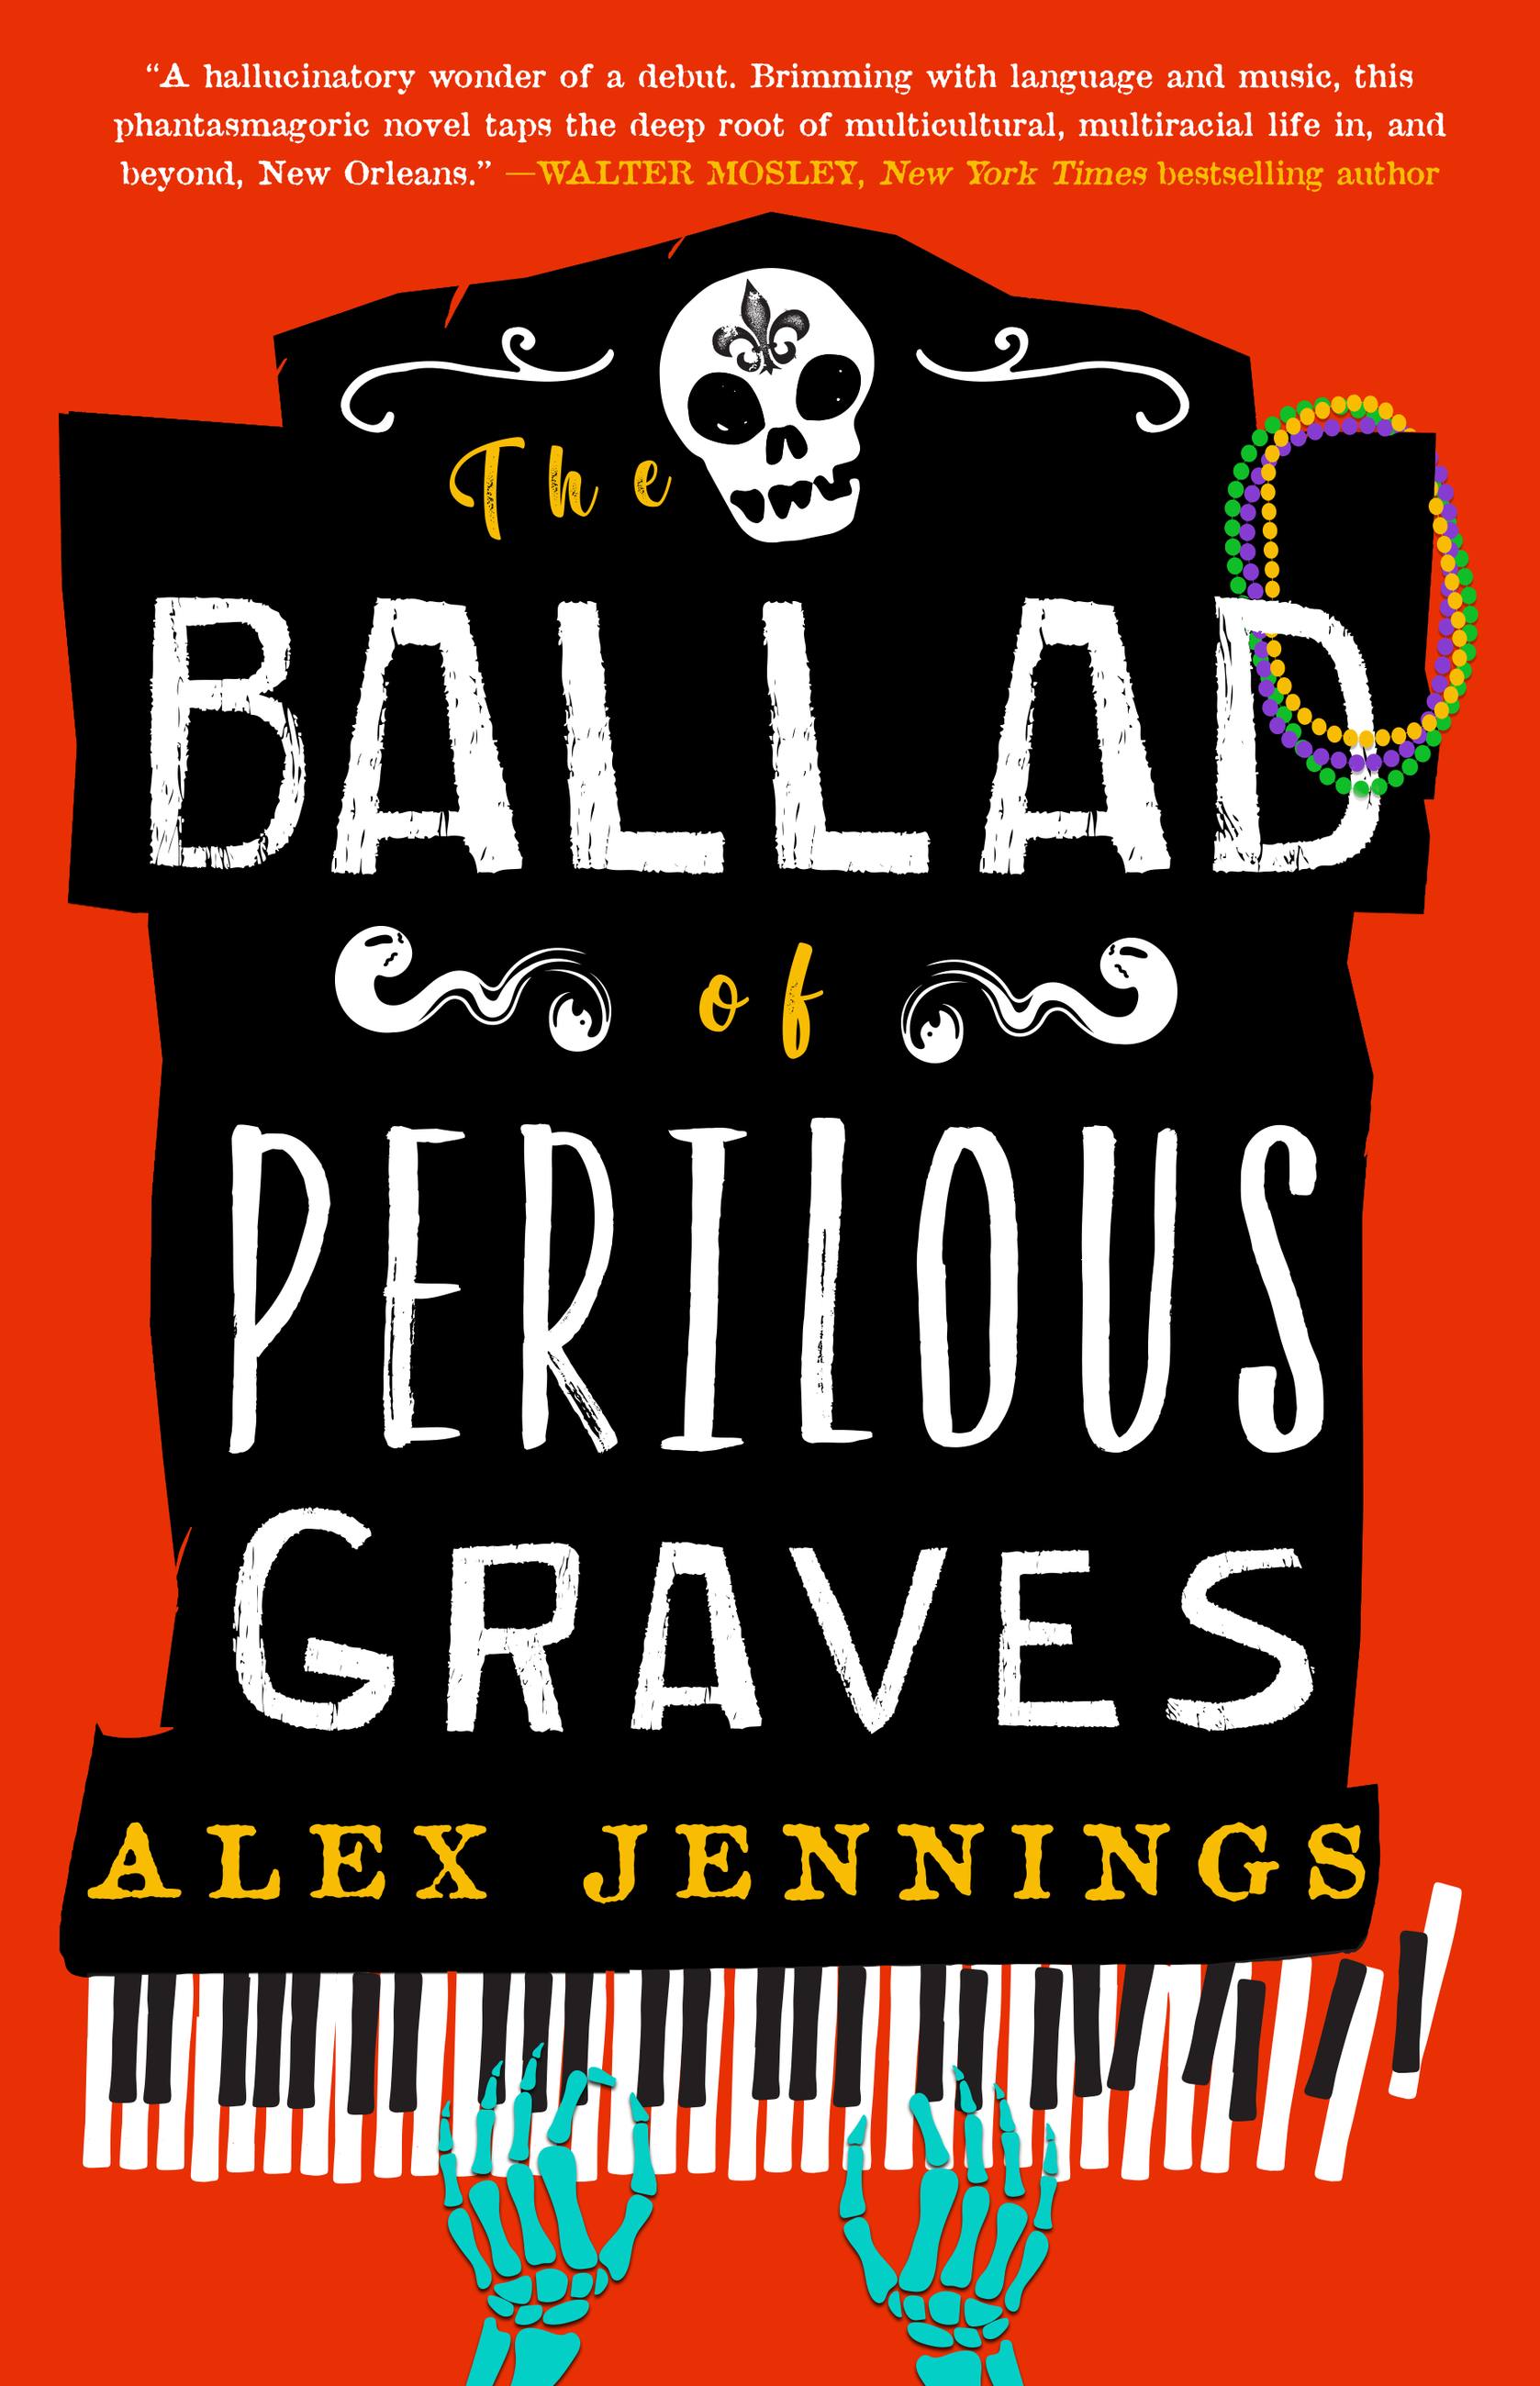 The Ballad of Perilous Graves by Alex Jennings | Hachette Book Group